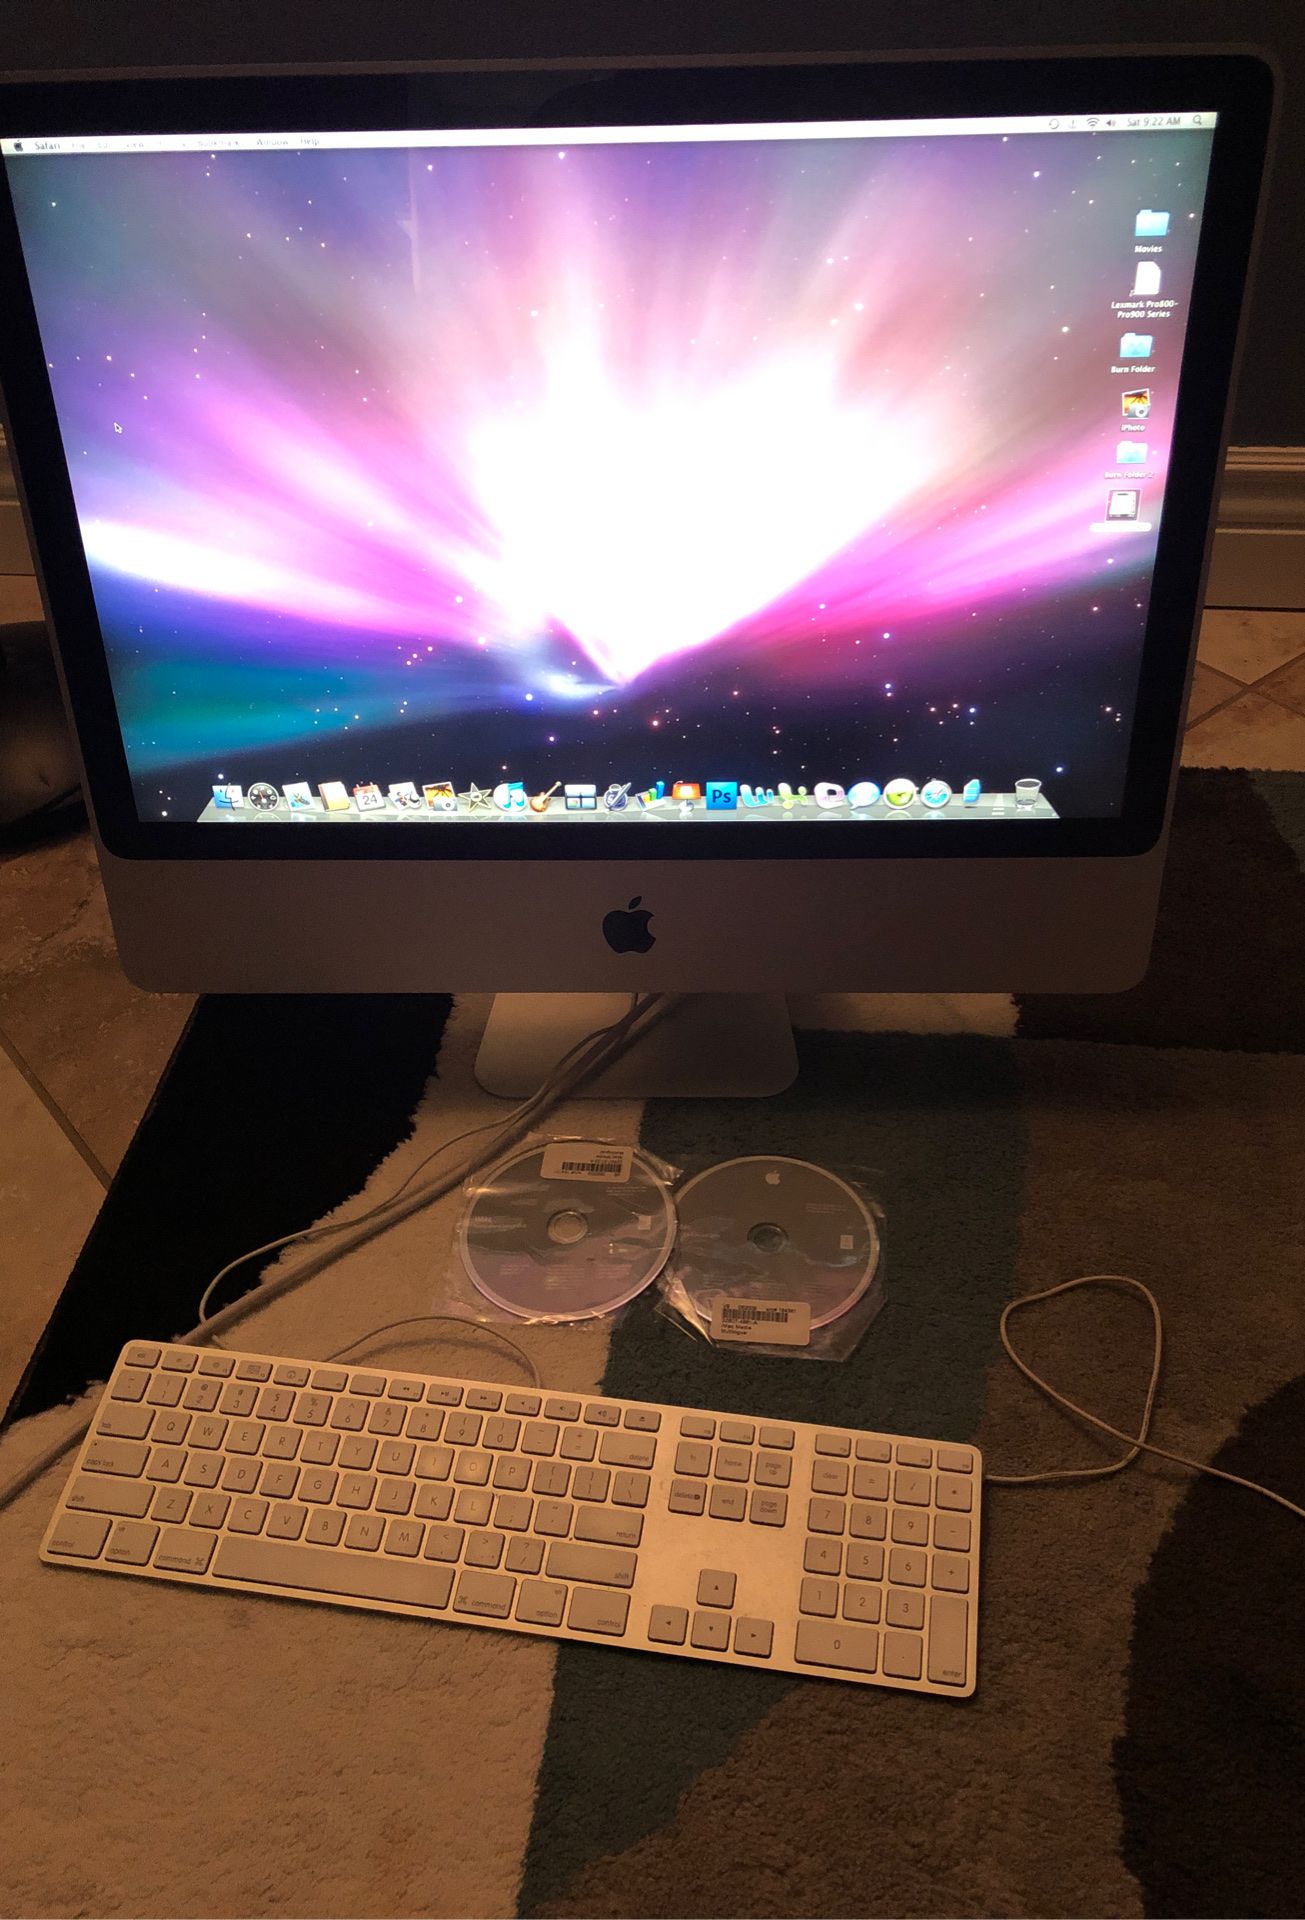 IMAC 9,1 2.66 GHZ For parts